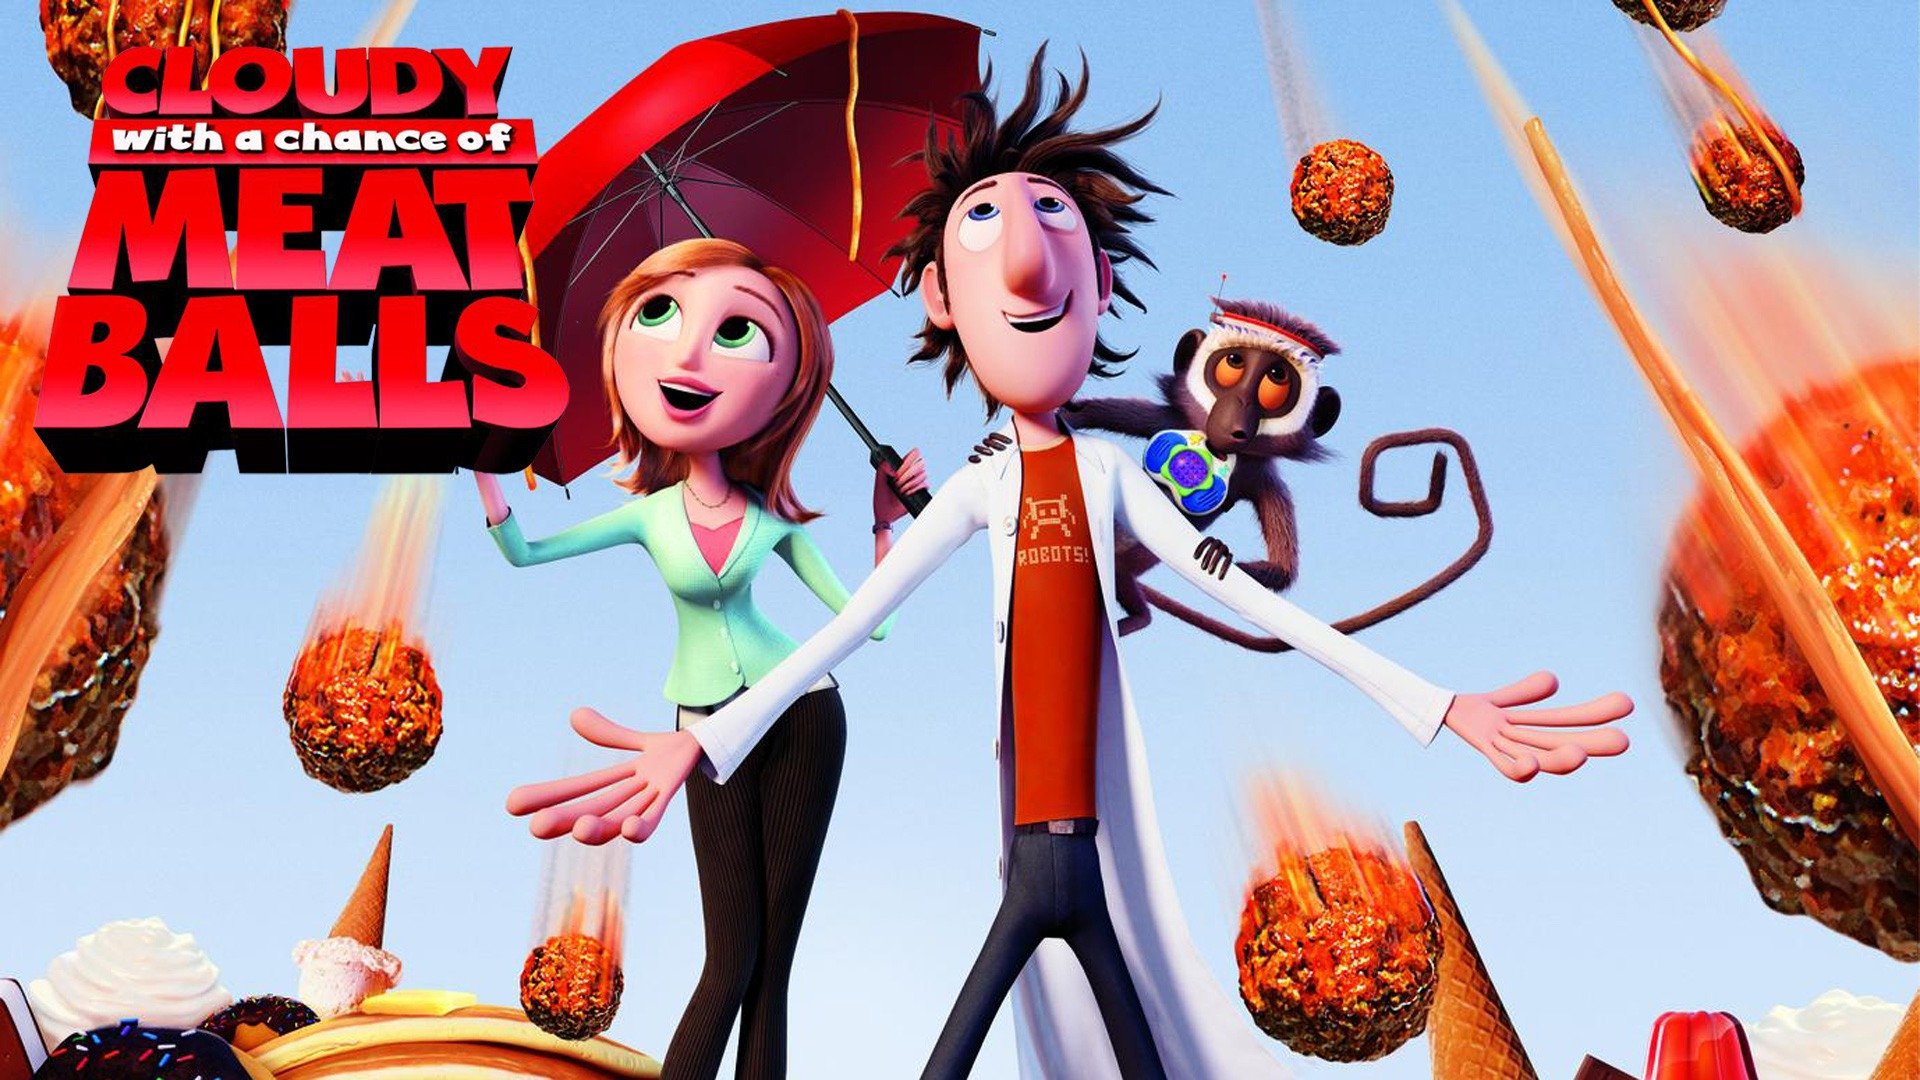 Watch Cloudy With a Chance of Meatballs Online with NEON from $4.99.